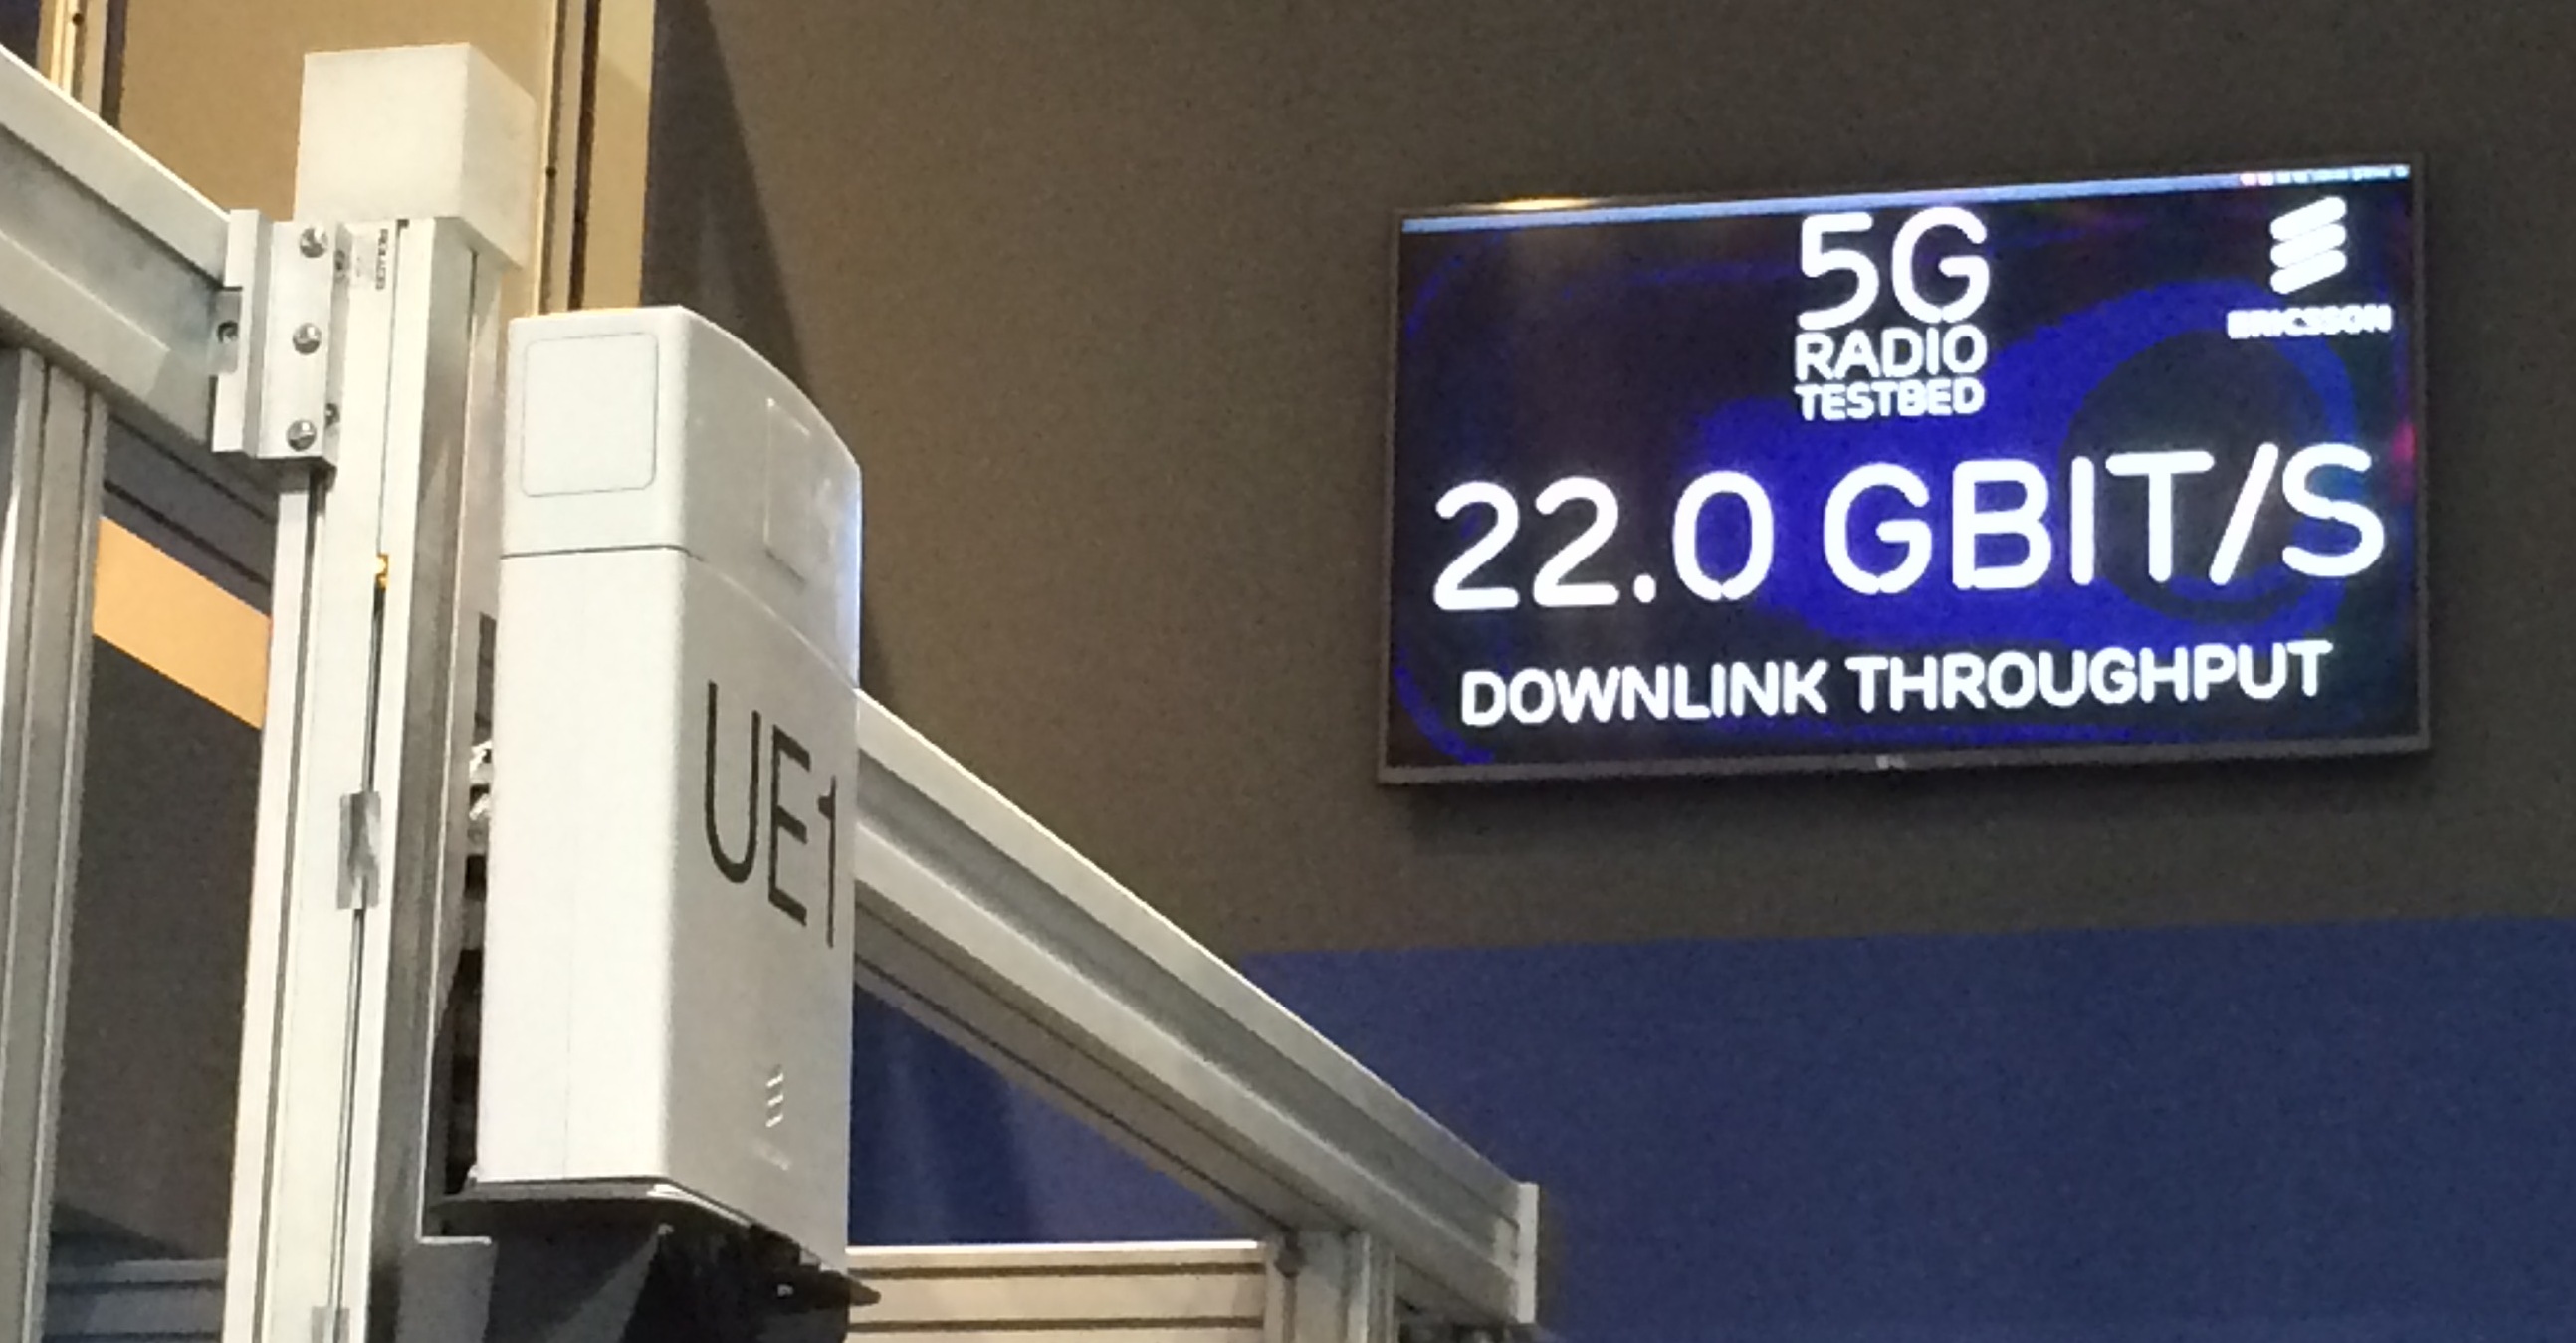 Ericsson's 15 GHz 5G test bed demonstrated data rates of up to 25 Gbps.